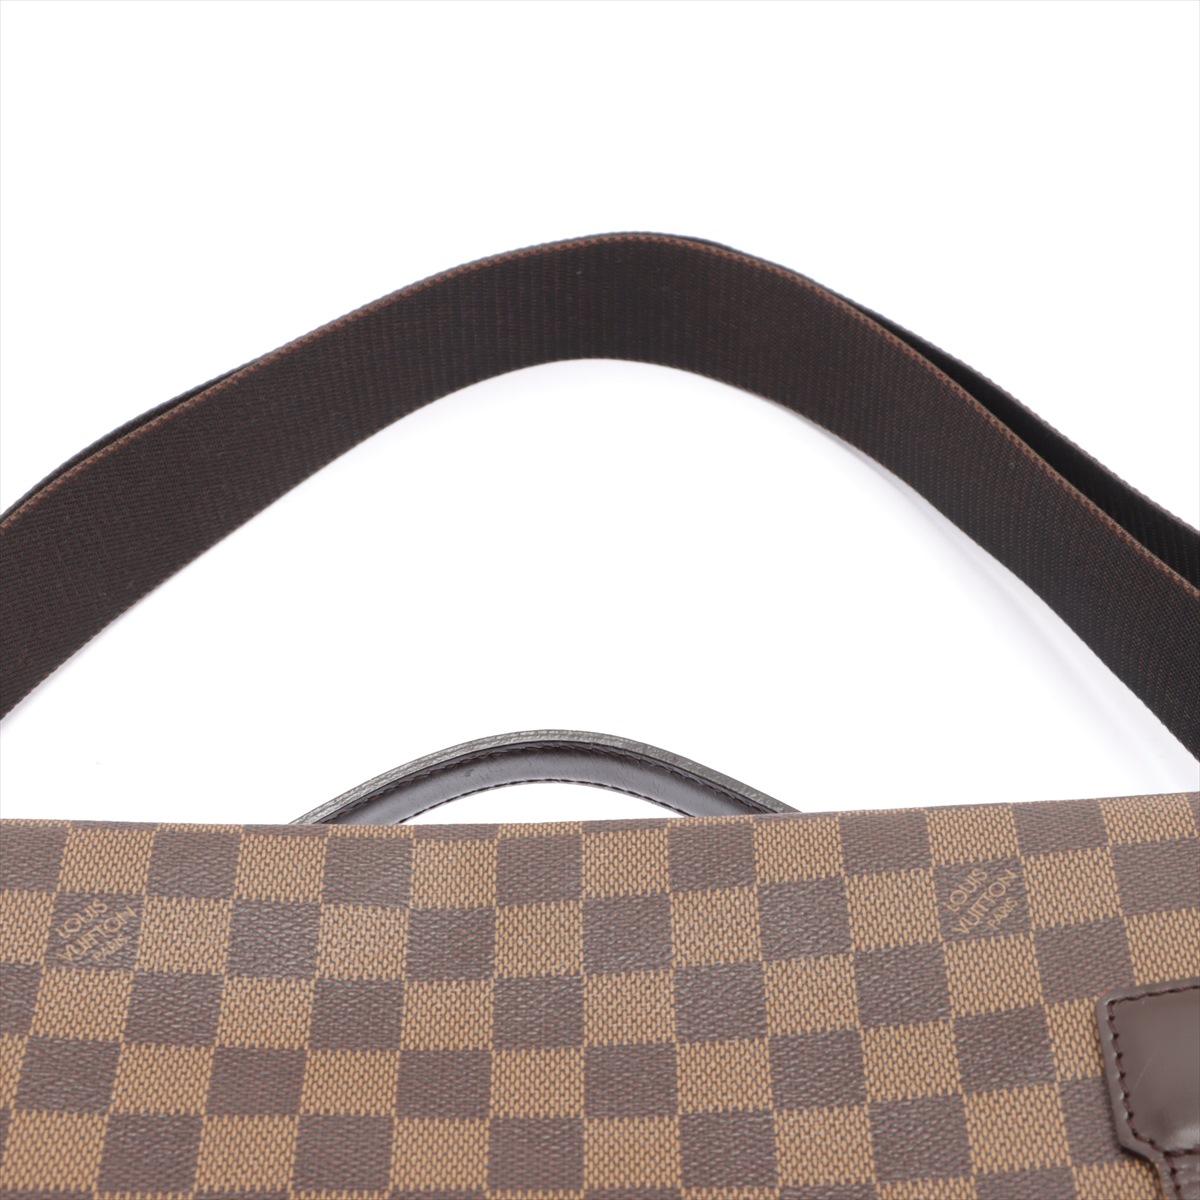 Louis Vuitton Damier Ebene Canvas Leather Broadway Messenger Bag In Good Condition For Sale In Irvine, CA